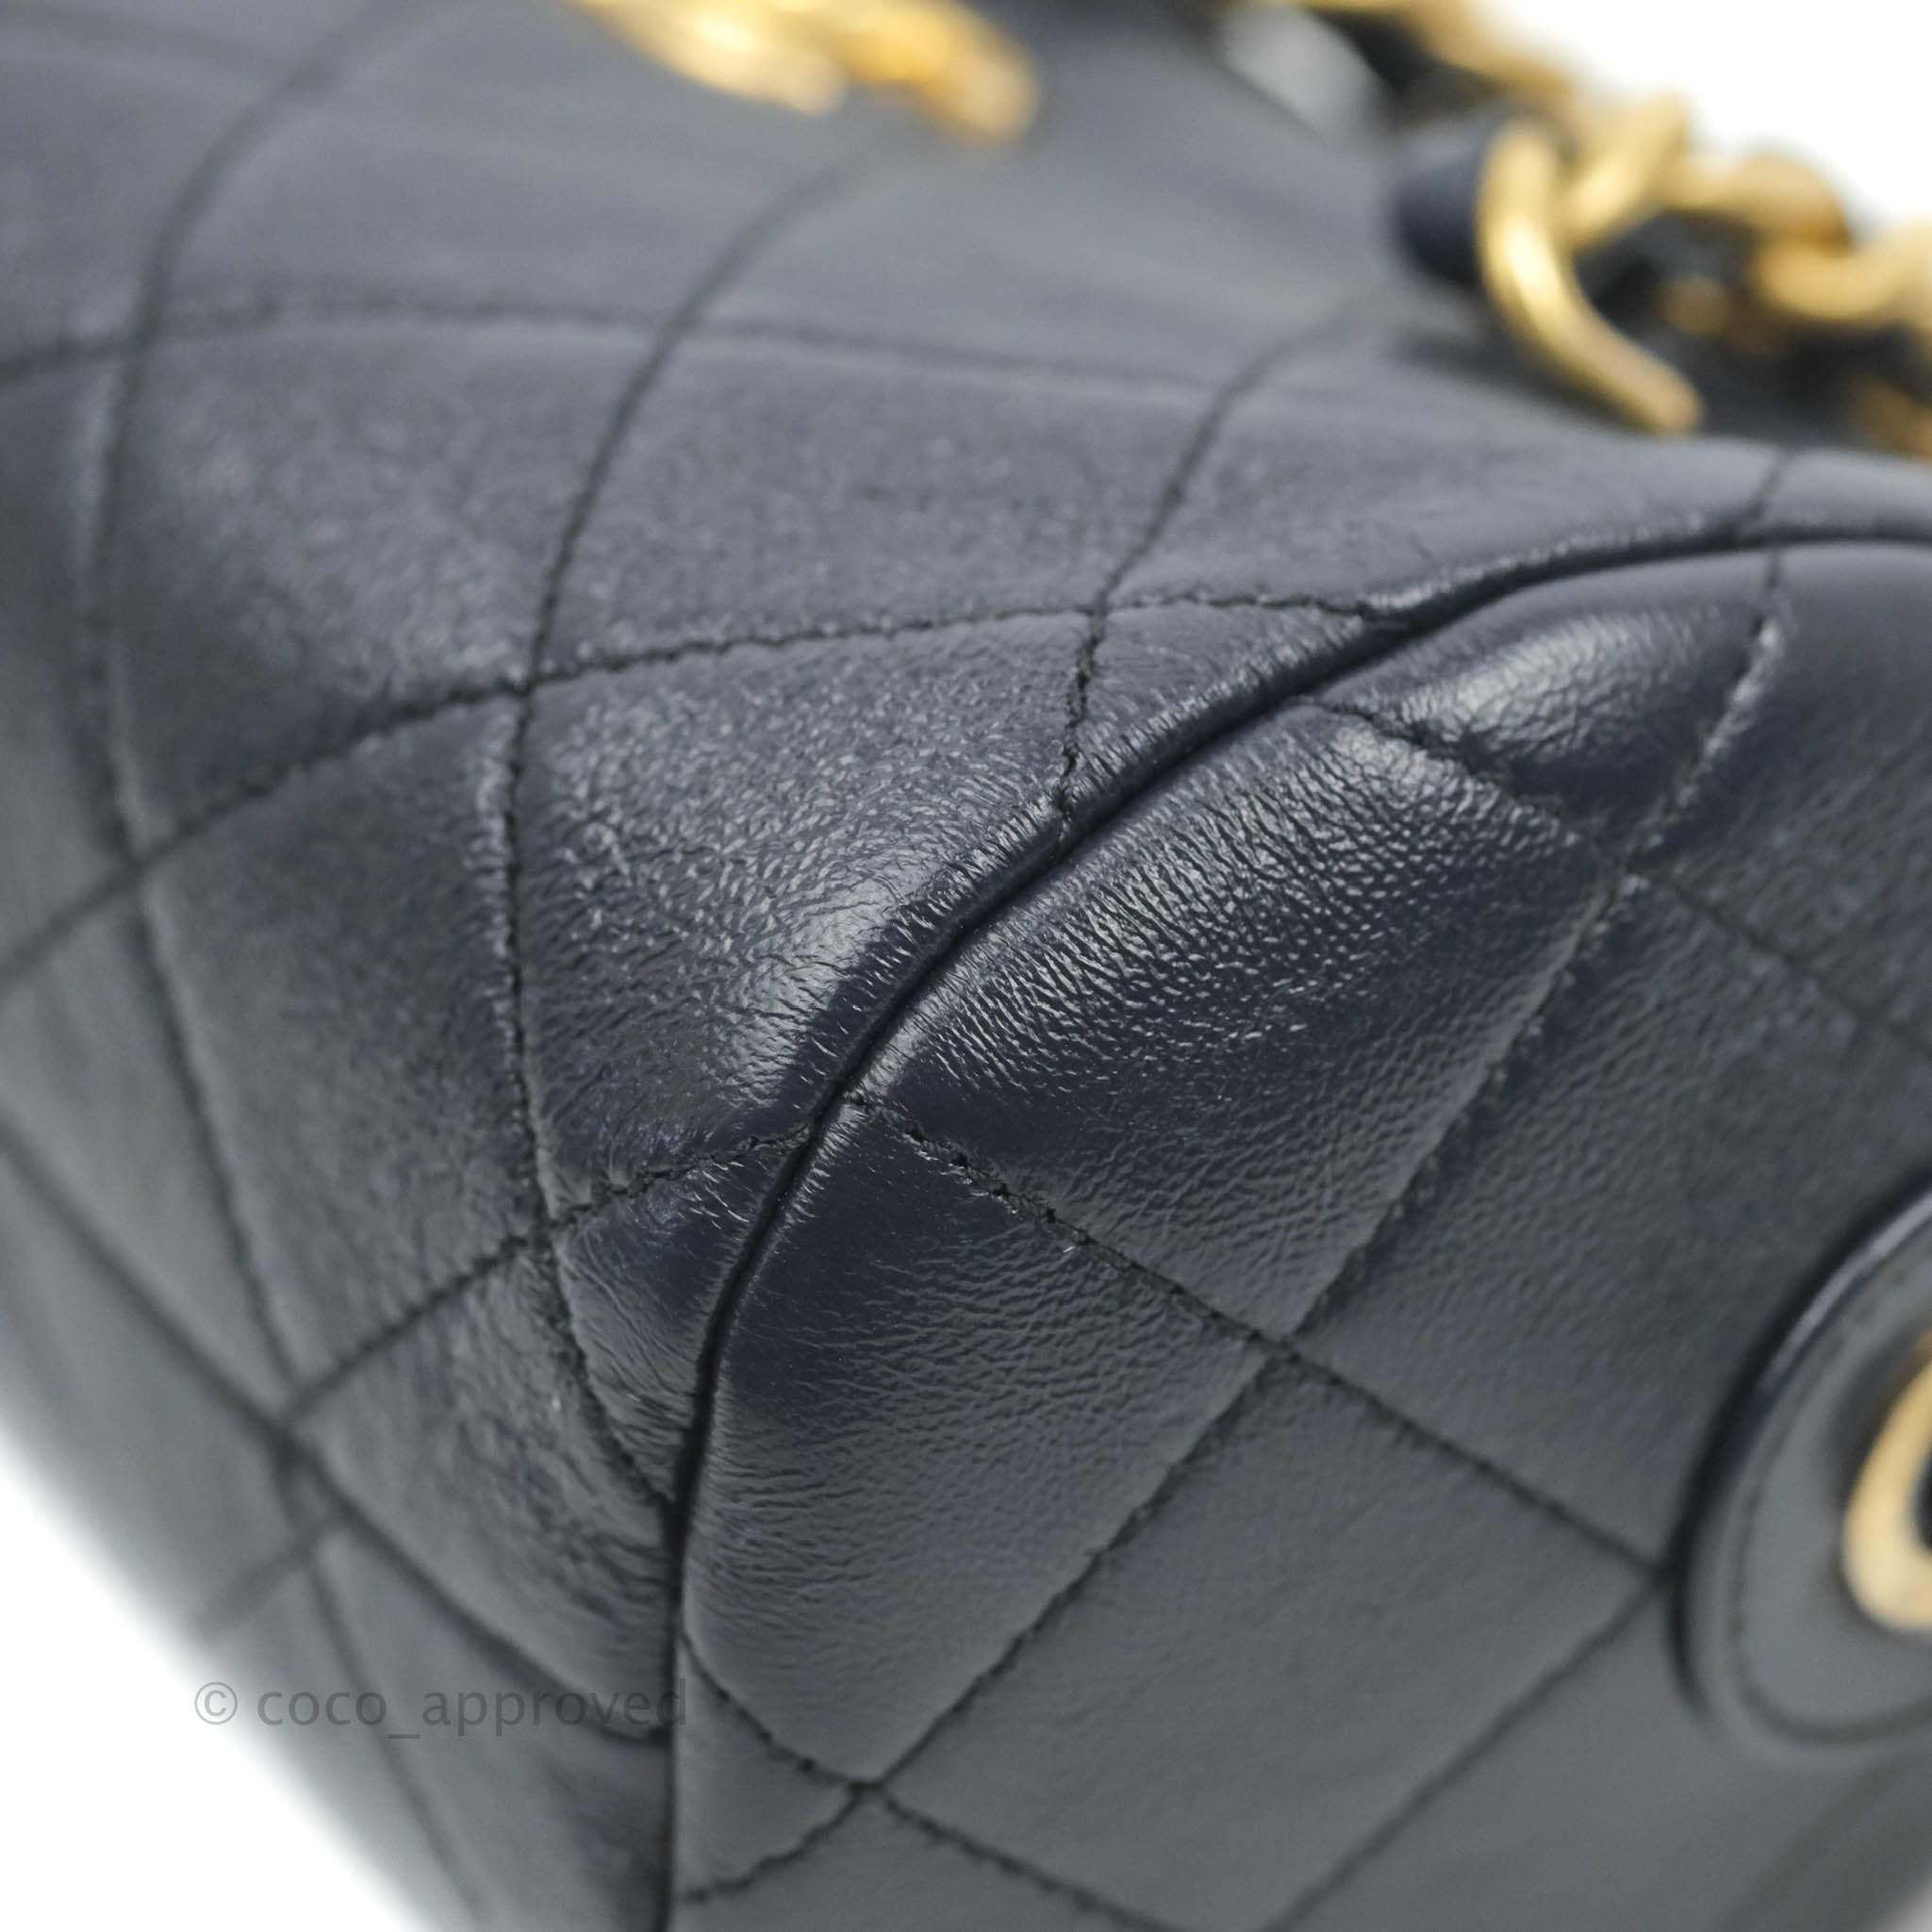 CHANEL Shiny Lambskin Quilted Fashion Therapy Bowling Bag Black